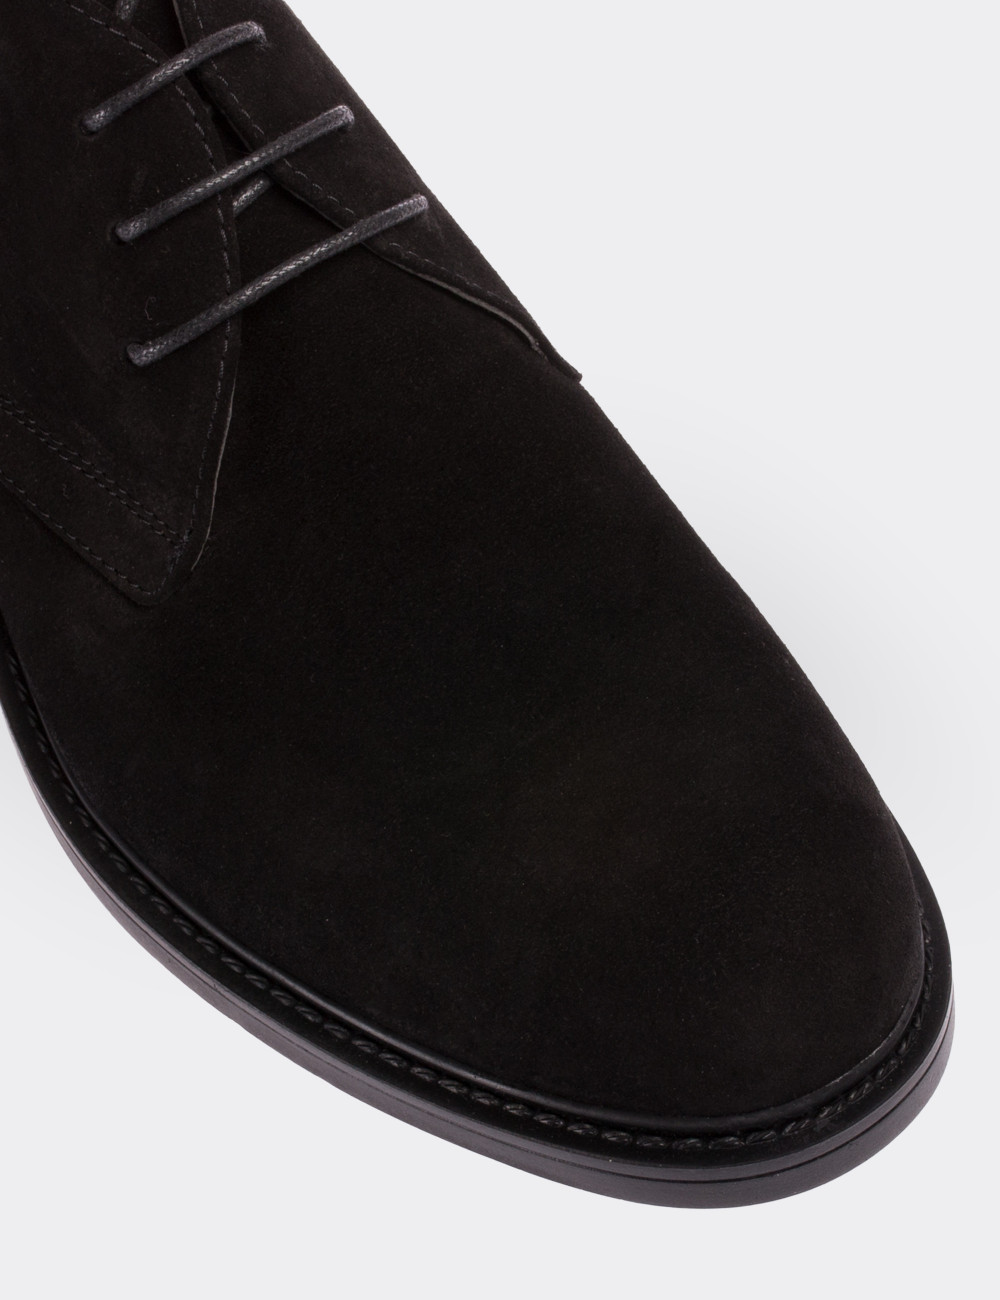 Black Suede Leather Desert Boots - 01295MSYHC01